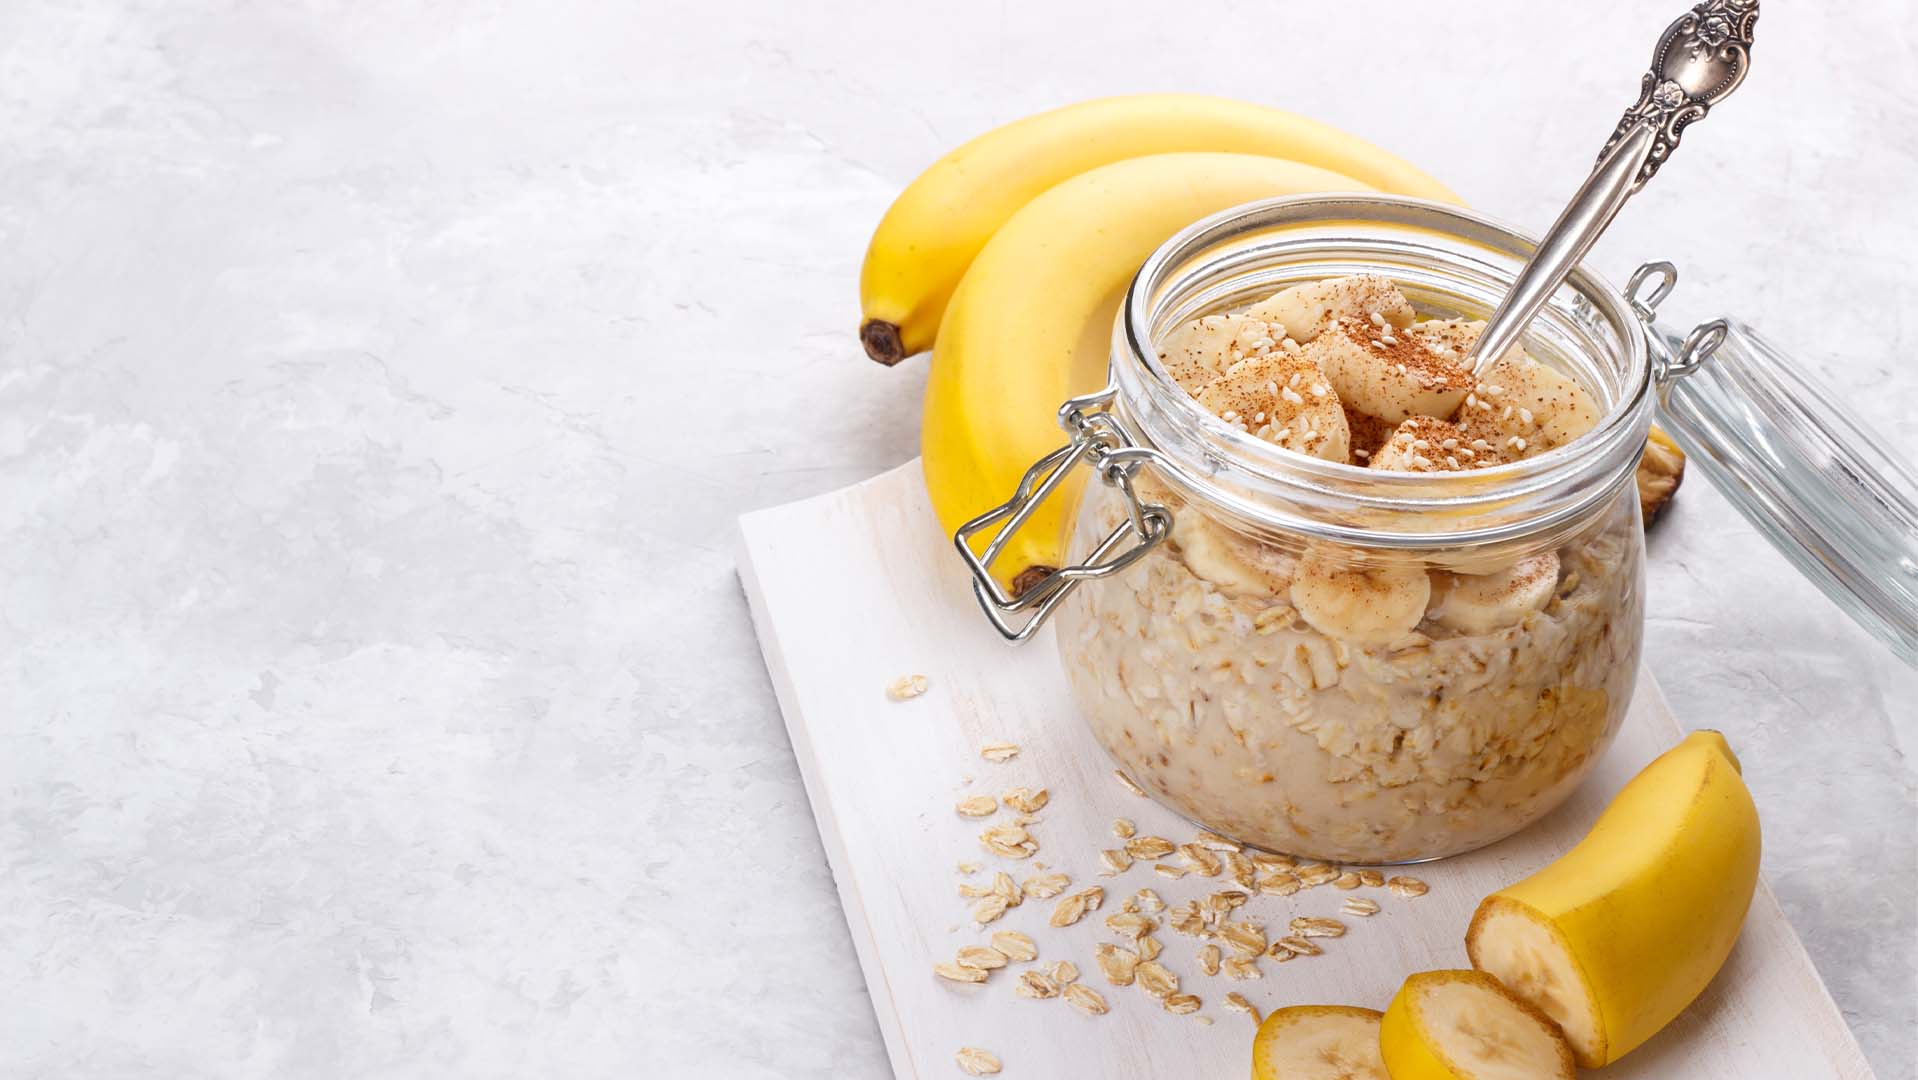 Featured image for “Peanut Butter & Banana Overnight Oats”